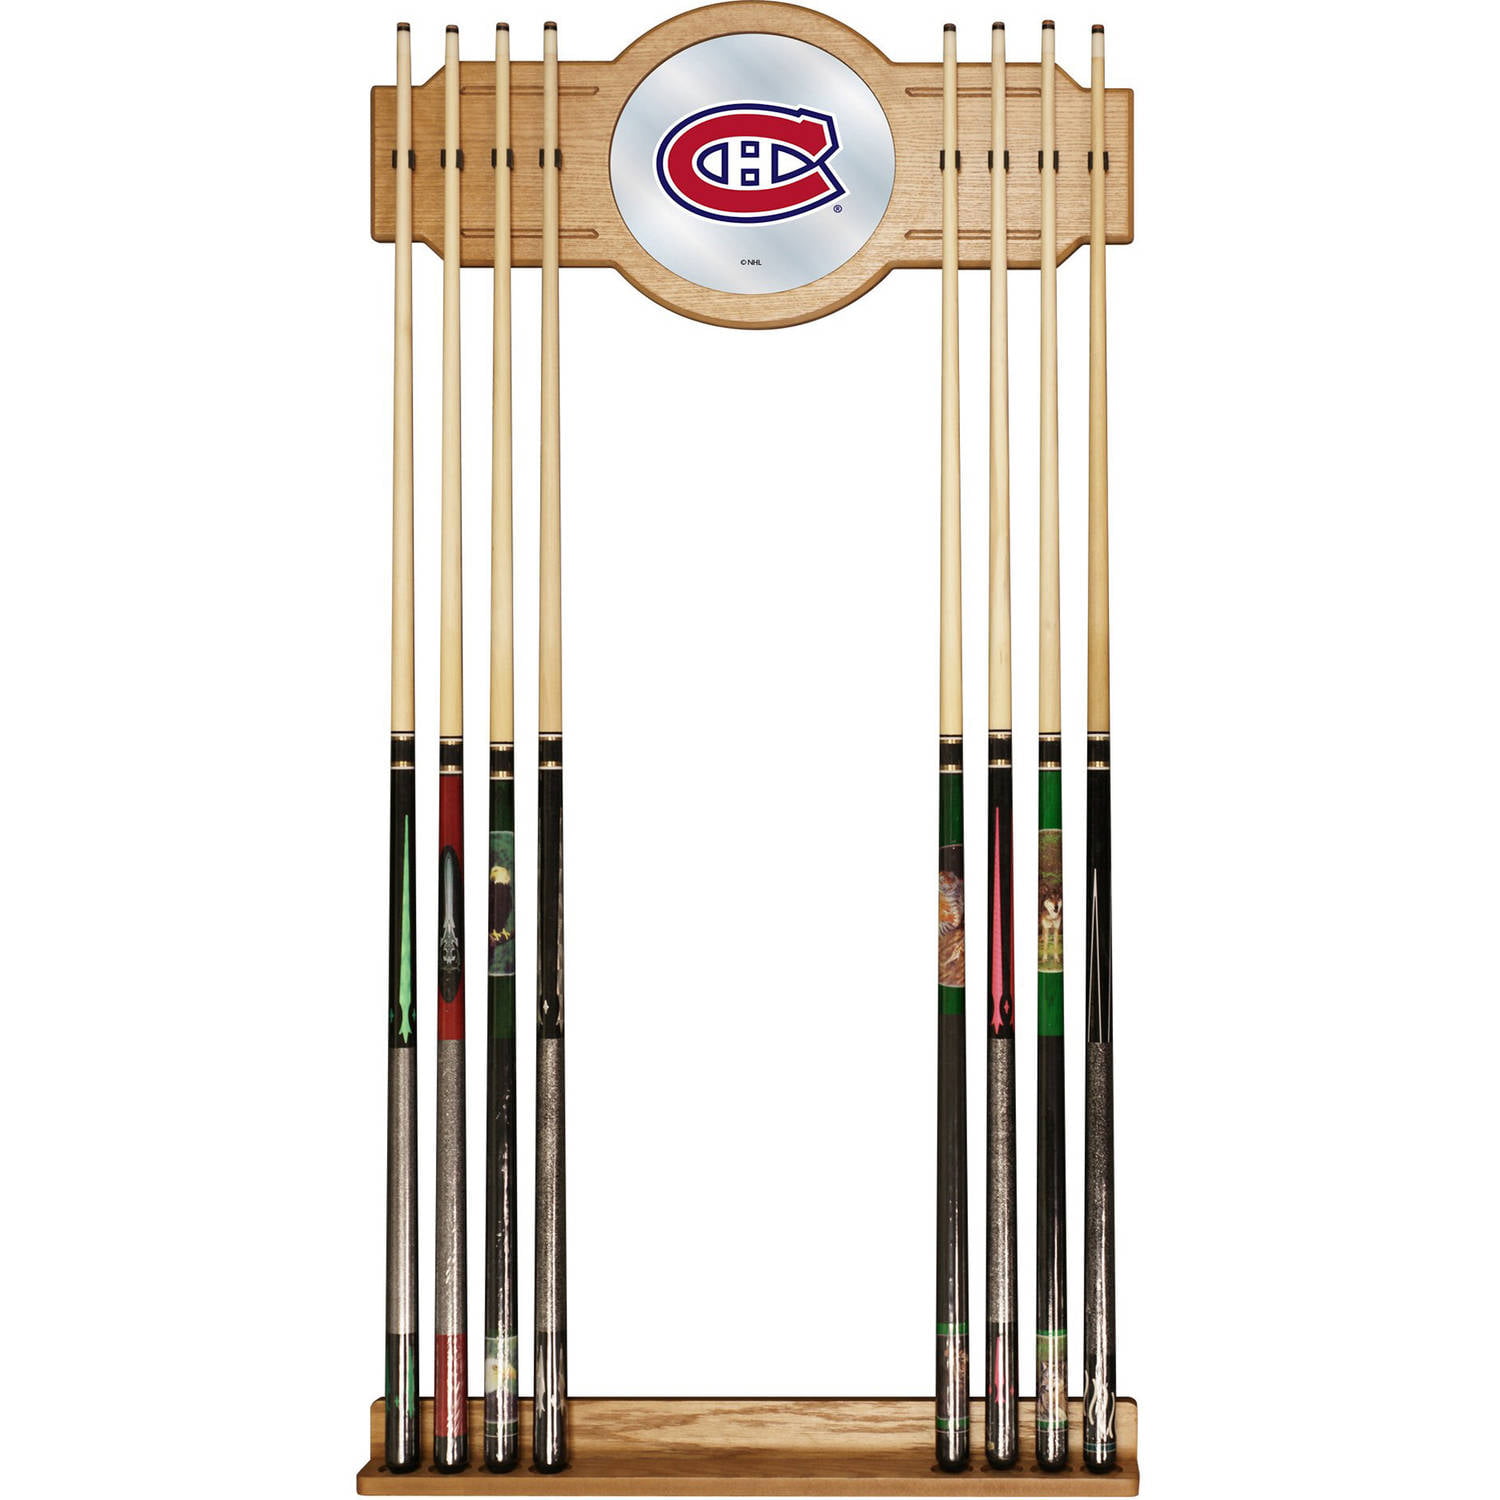 Deluxe Hard Wood Boston Red Sox Cue Wall Rack Holds 6 Cues Mirrored Sox Logo 